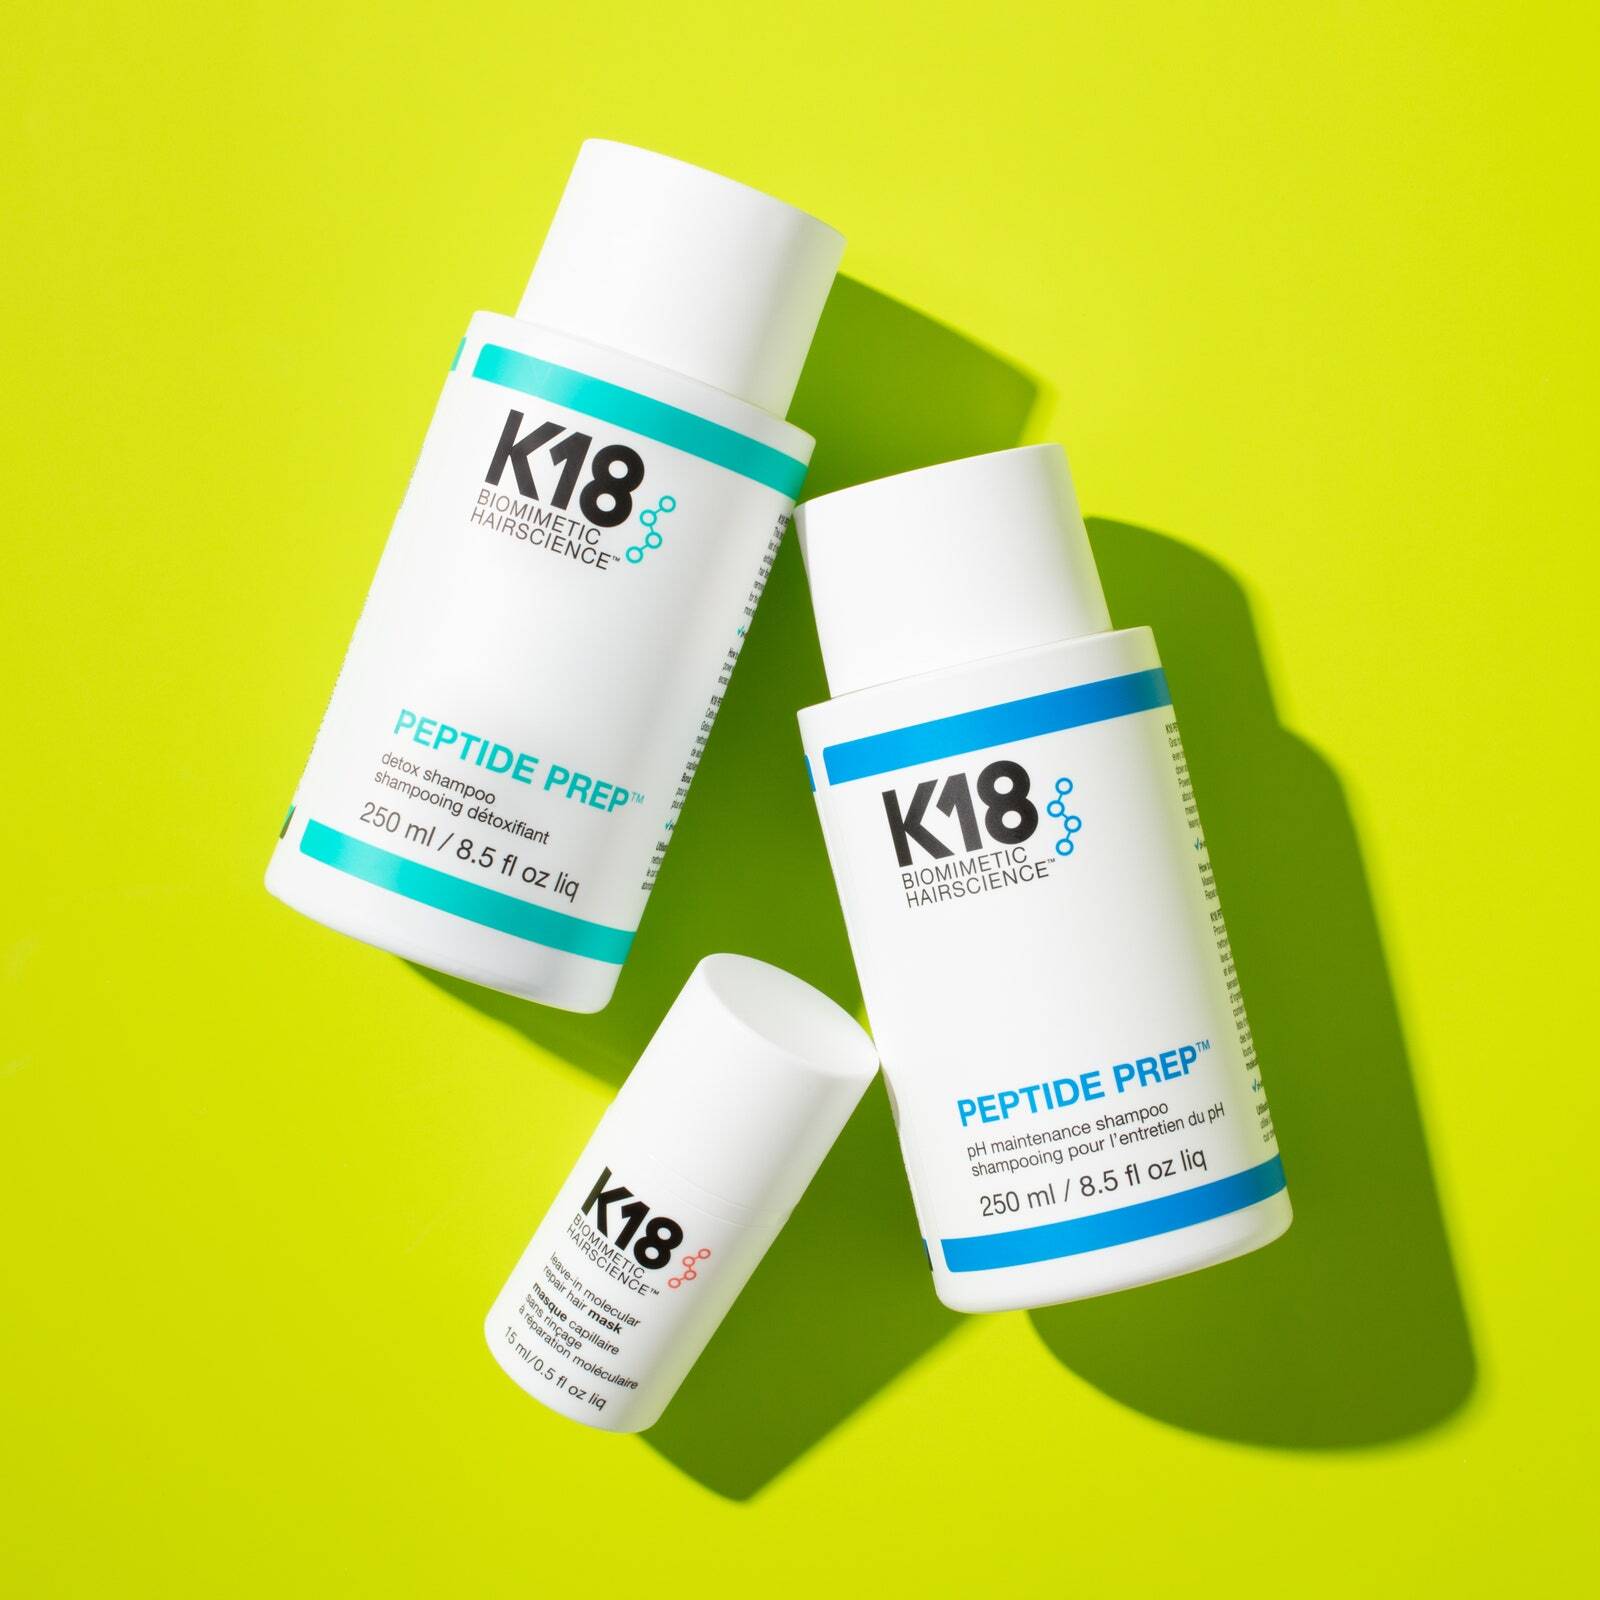 k18-shampoos-together-2 | Breaking Beauty